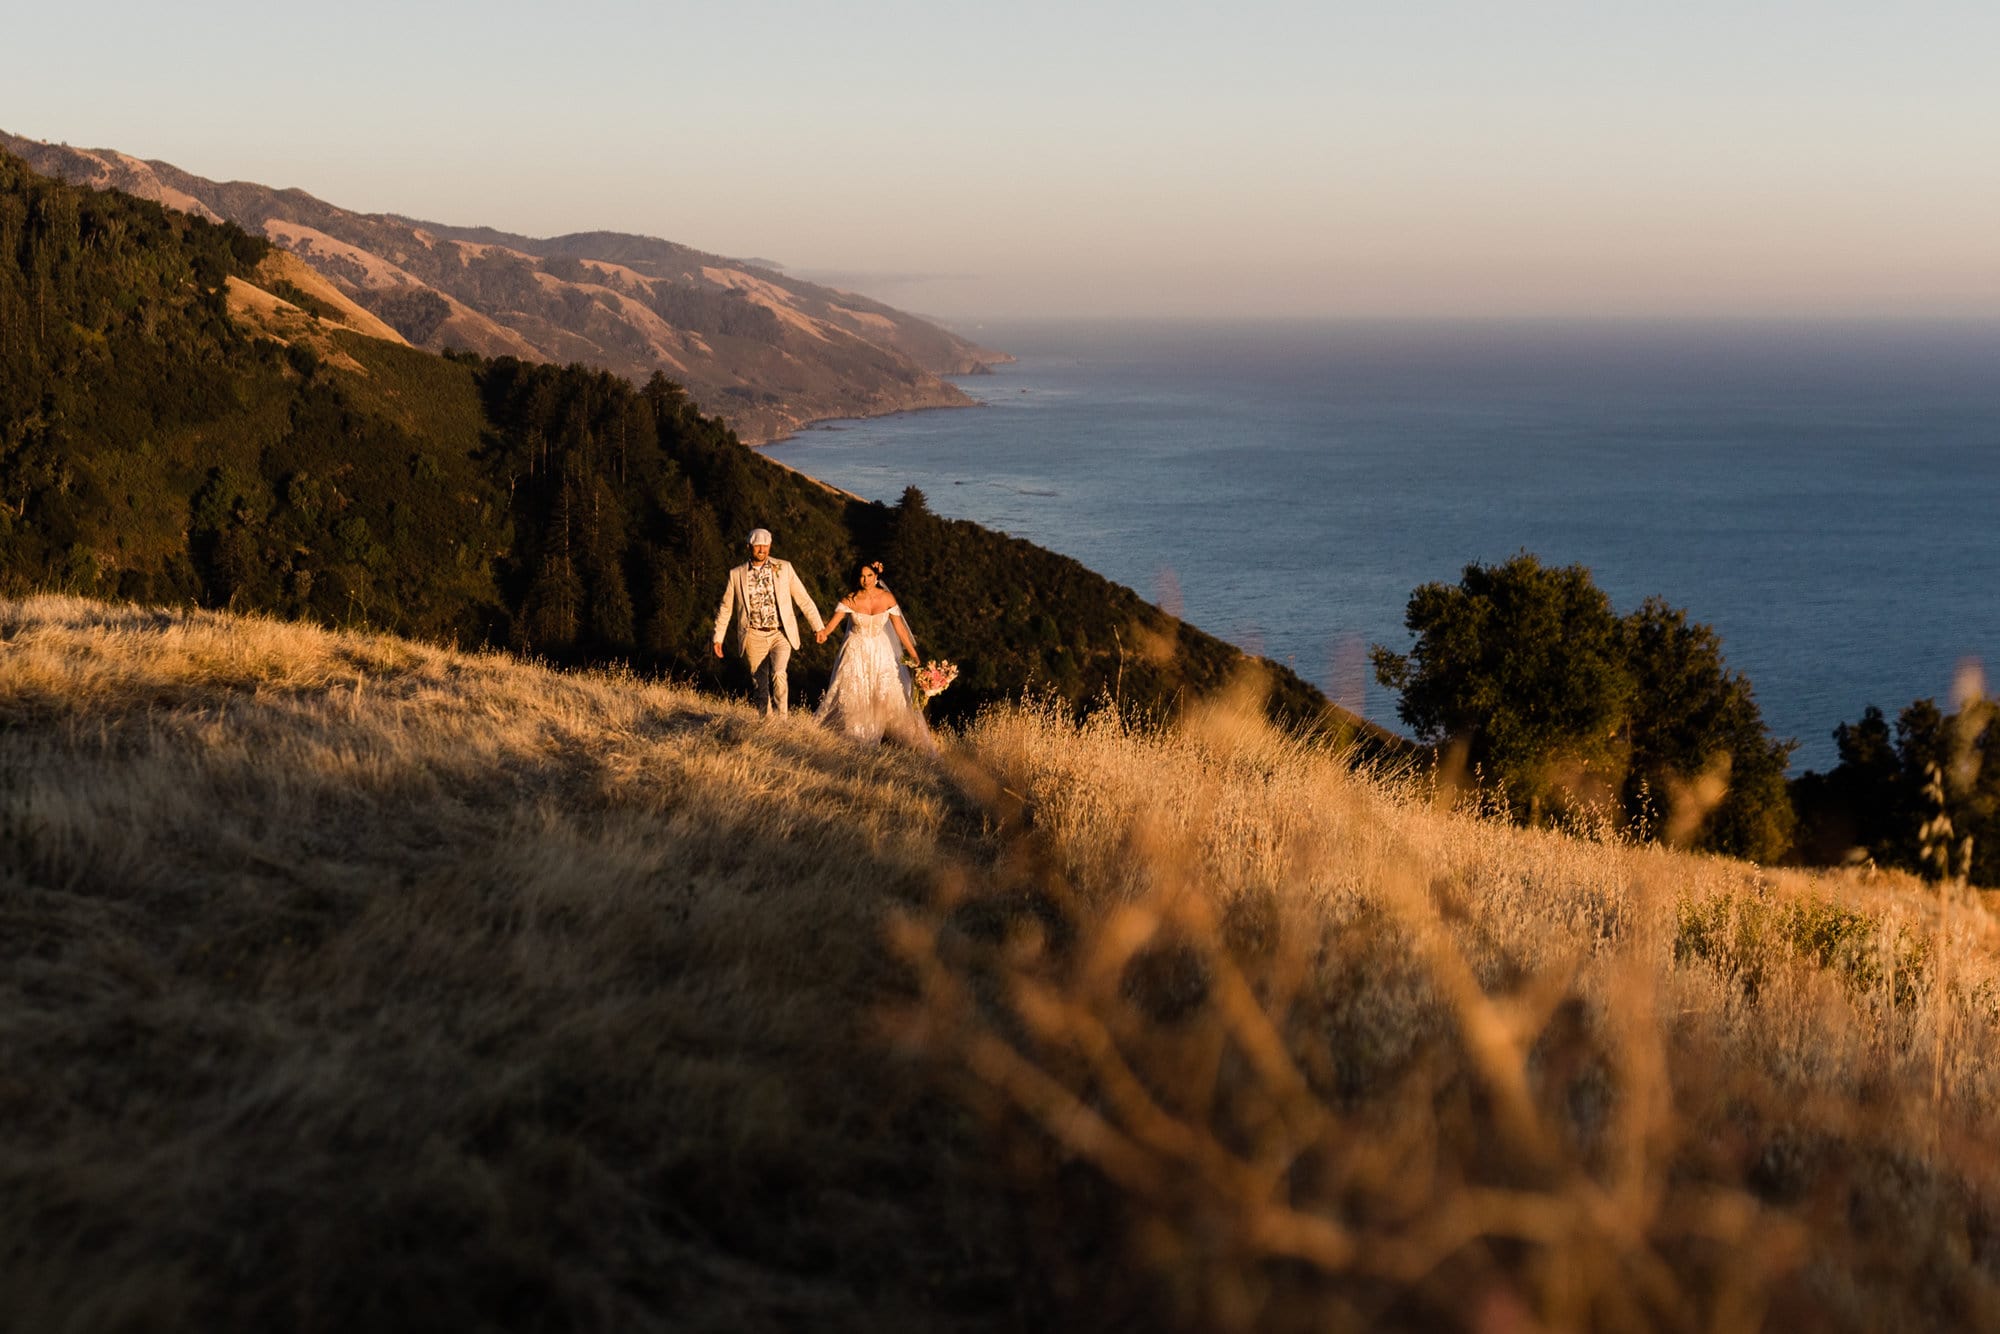 This two day Big Sur elopement is the epitome of romance and adventure. Full of coastal views and redwood trees, this elopement is one for the books.